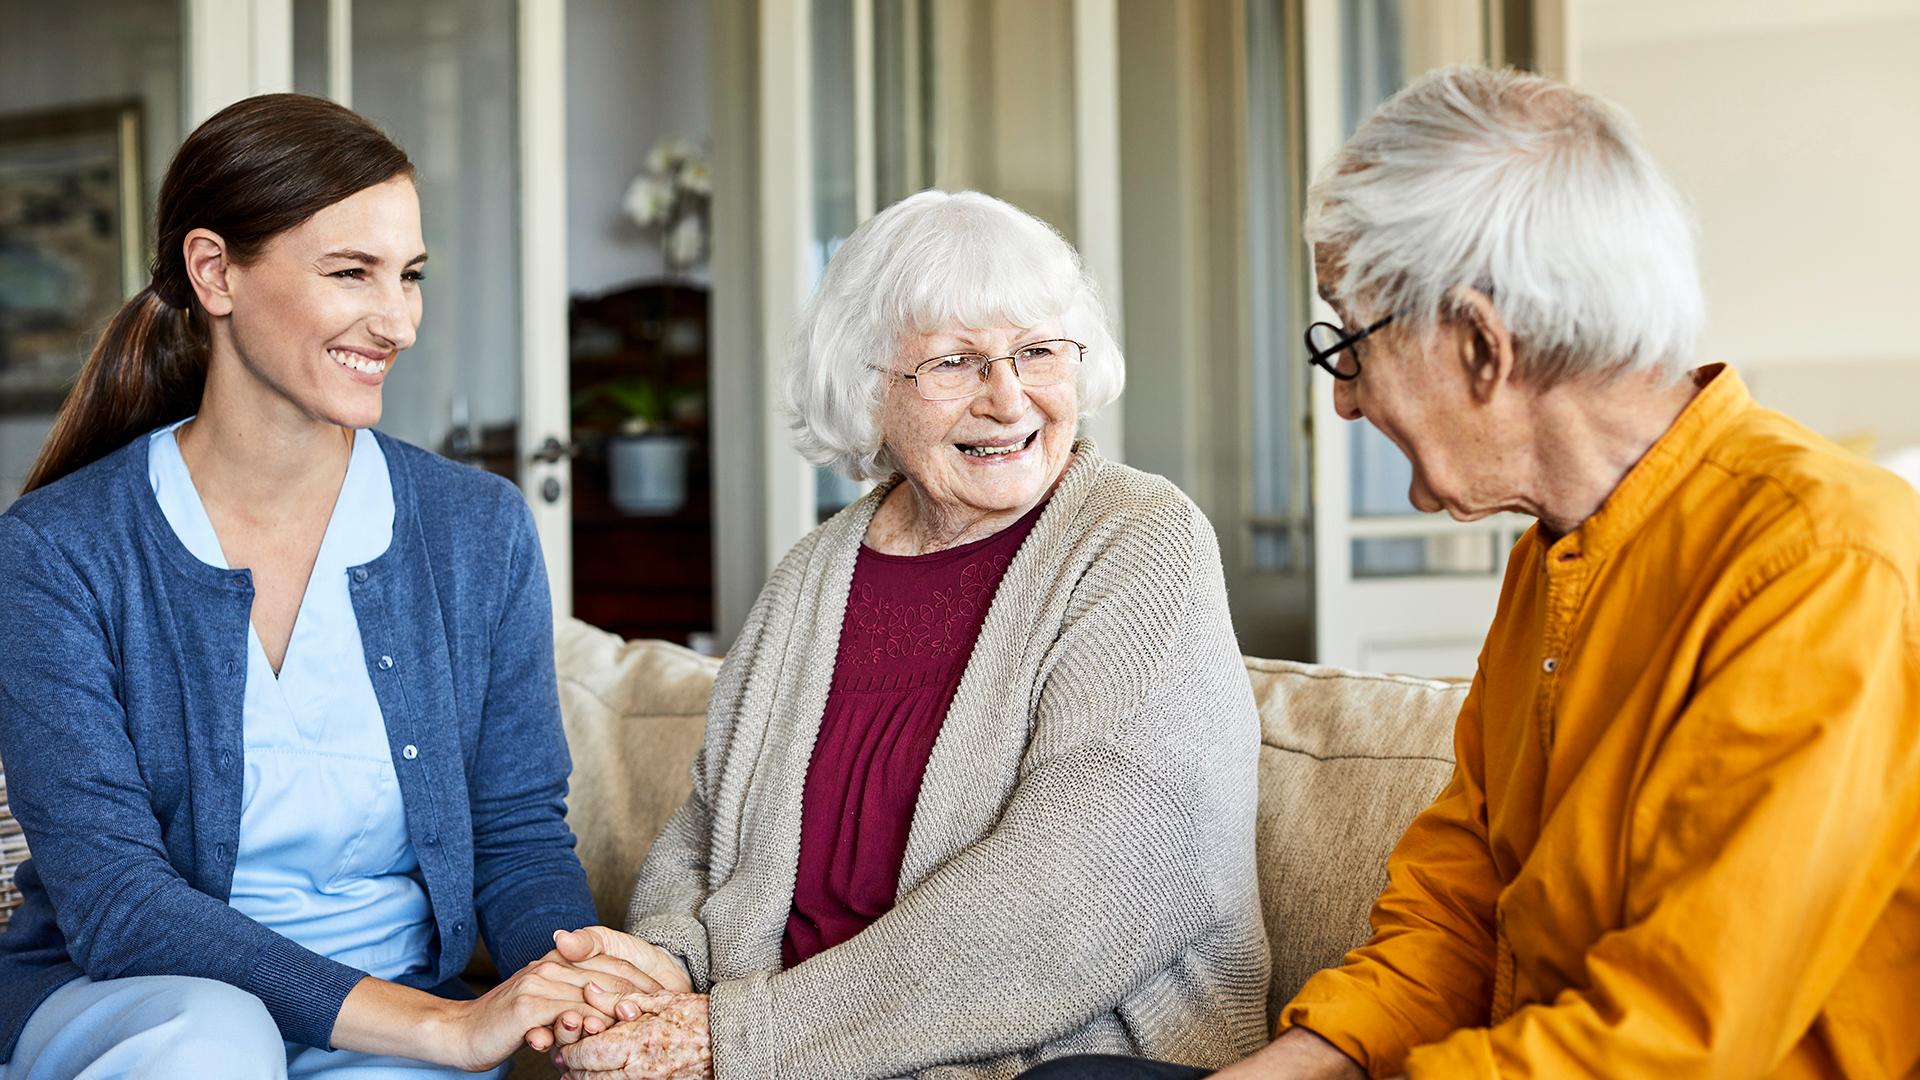 Smiling nurse with elderly couple at home